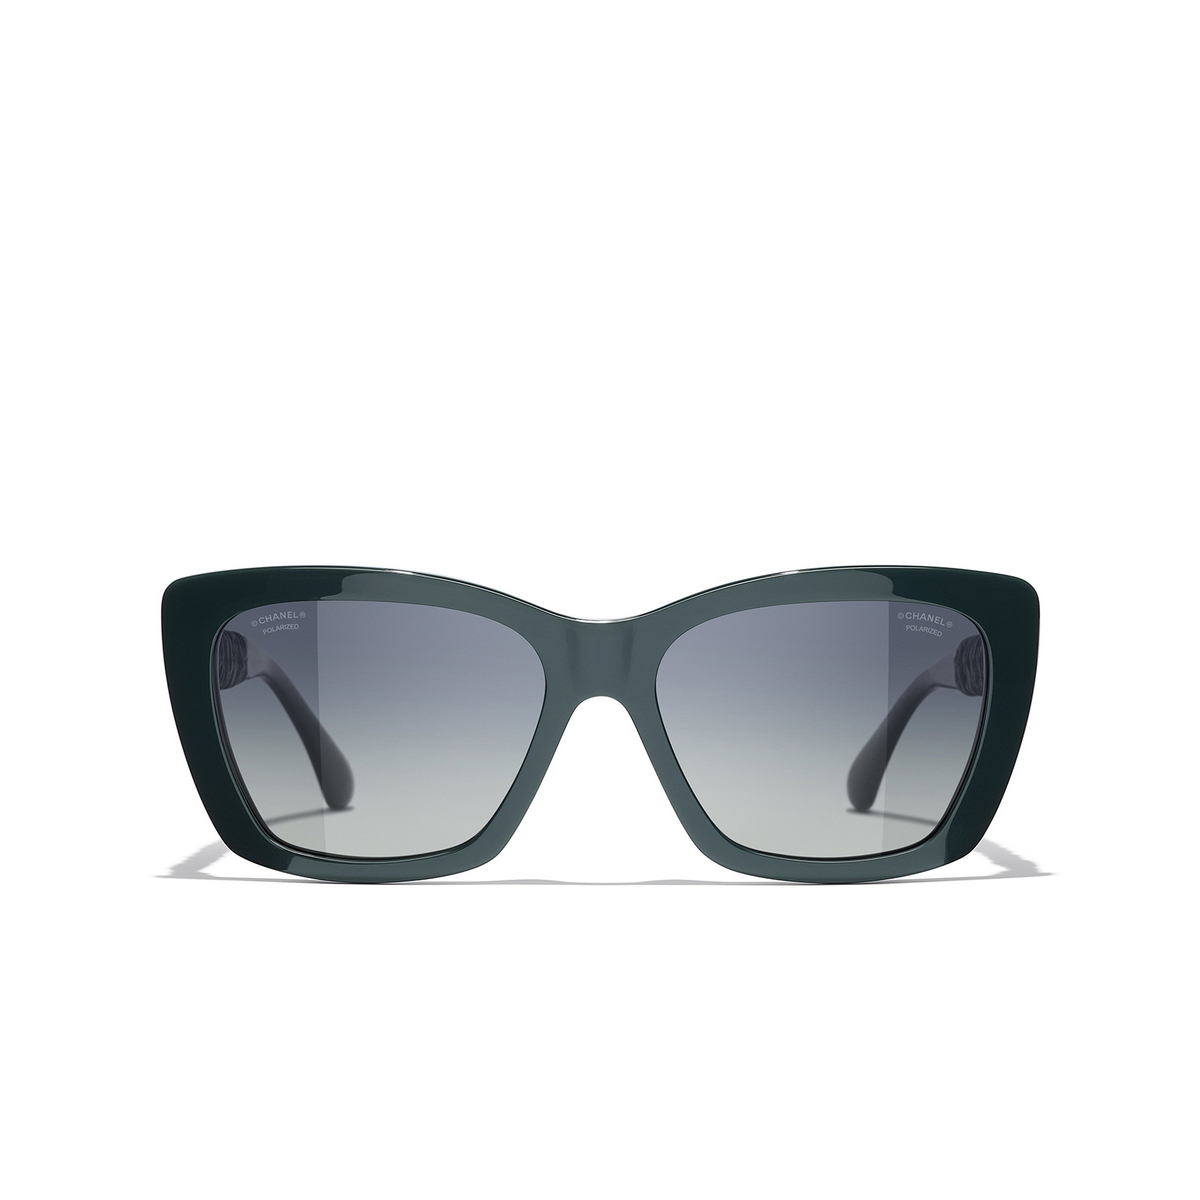 CHANEL butterfly Sunglasses 1459S8 Dark Green  - front view